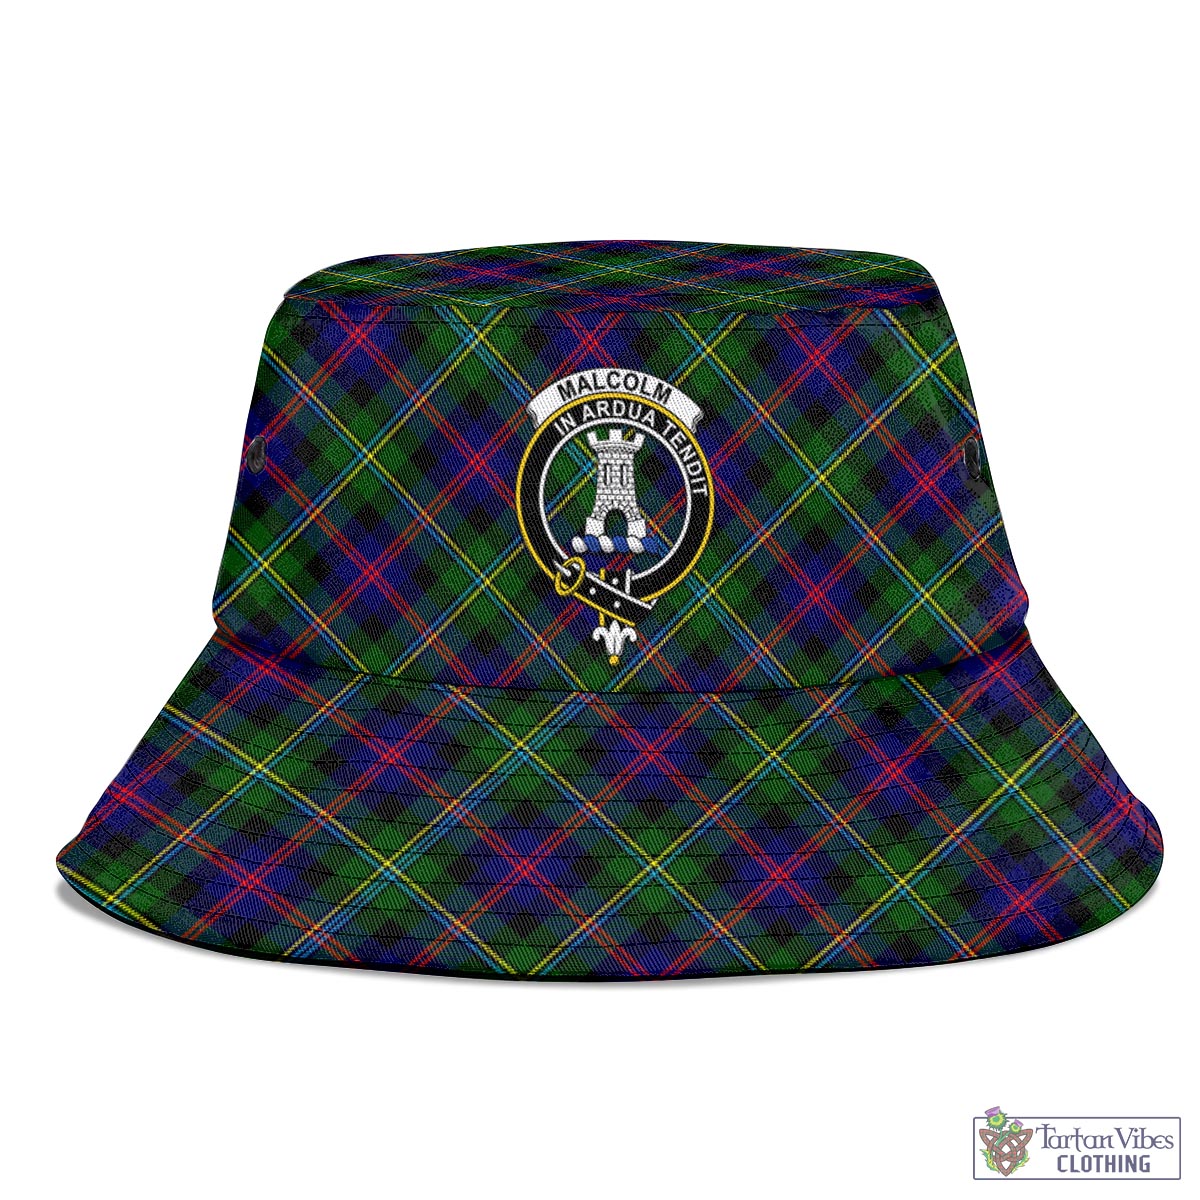 Tartan Vibes Clothing Malcolm Tartan Bucket Hat with Family Crest